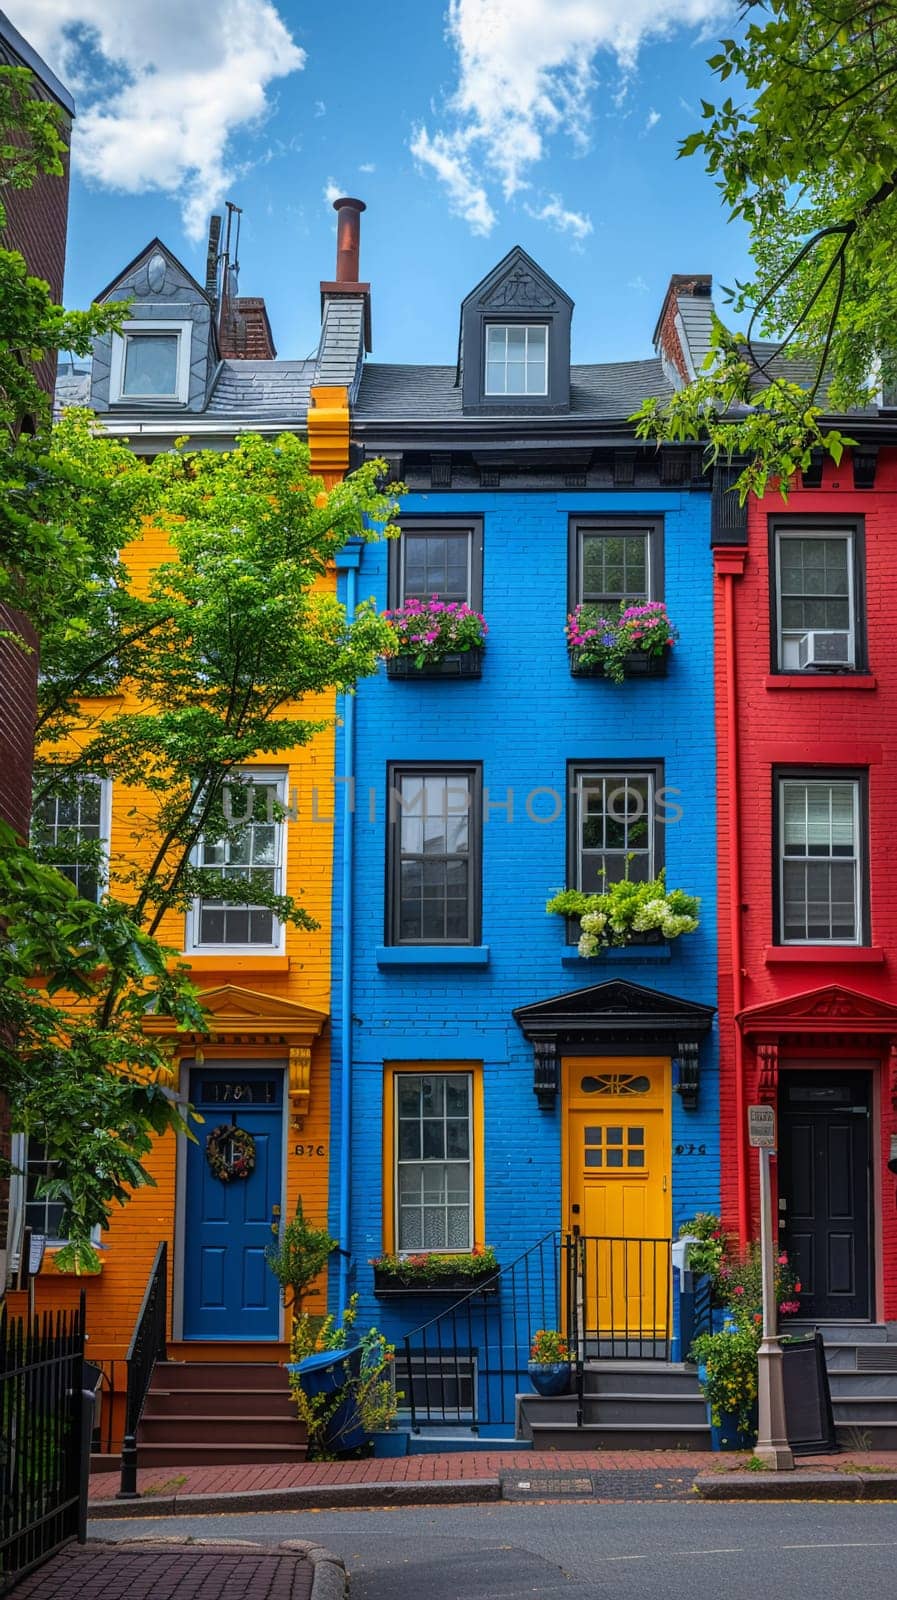 Row of colorful townhouses, exemplifying urban living and real estate.